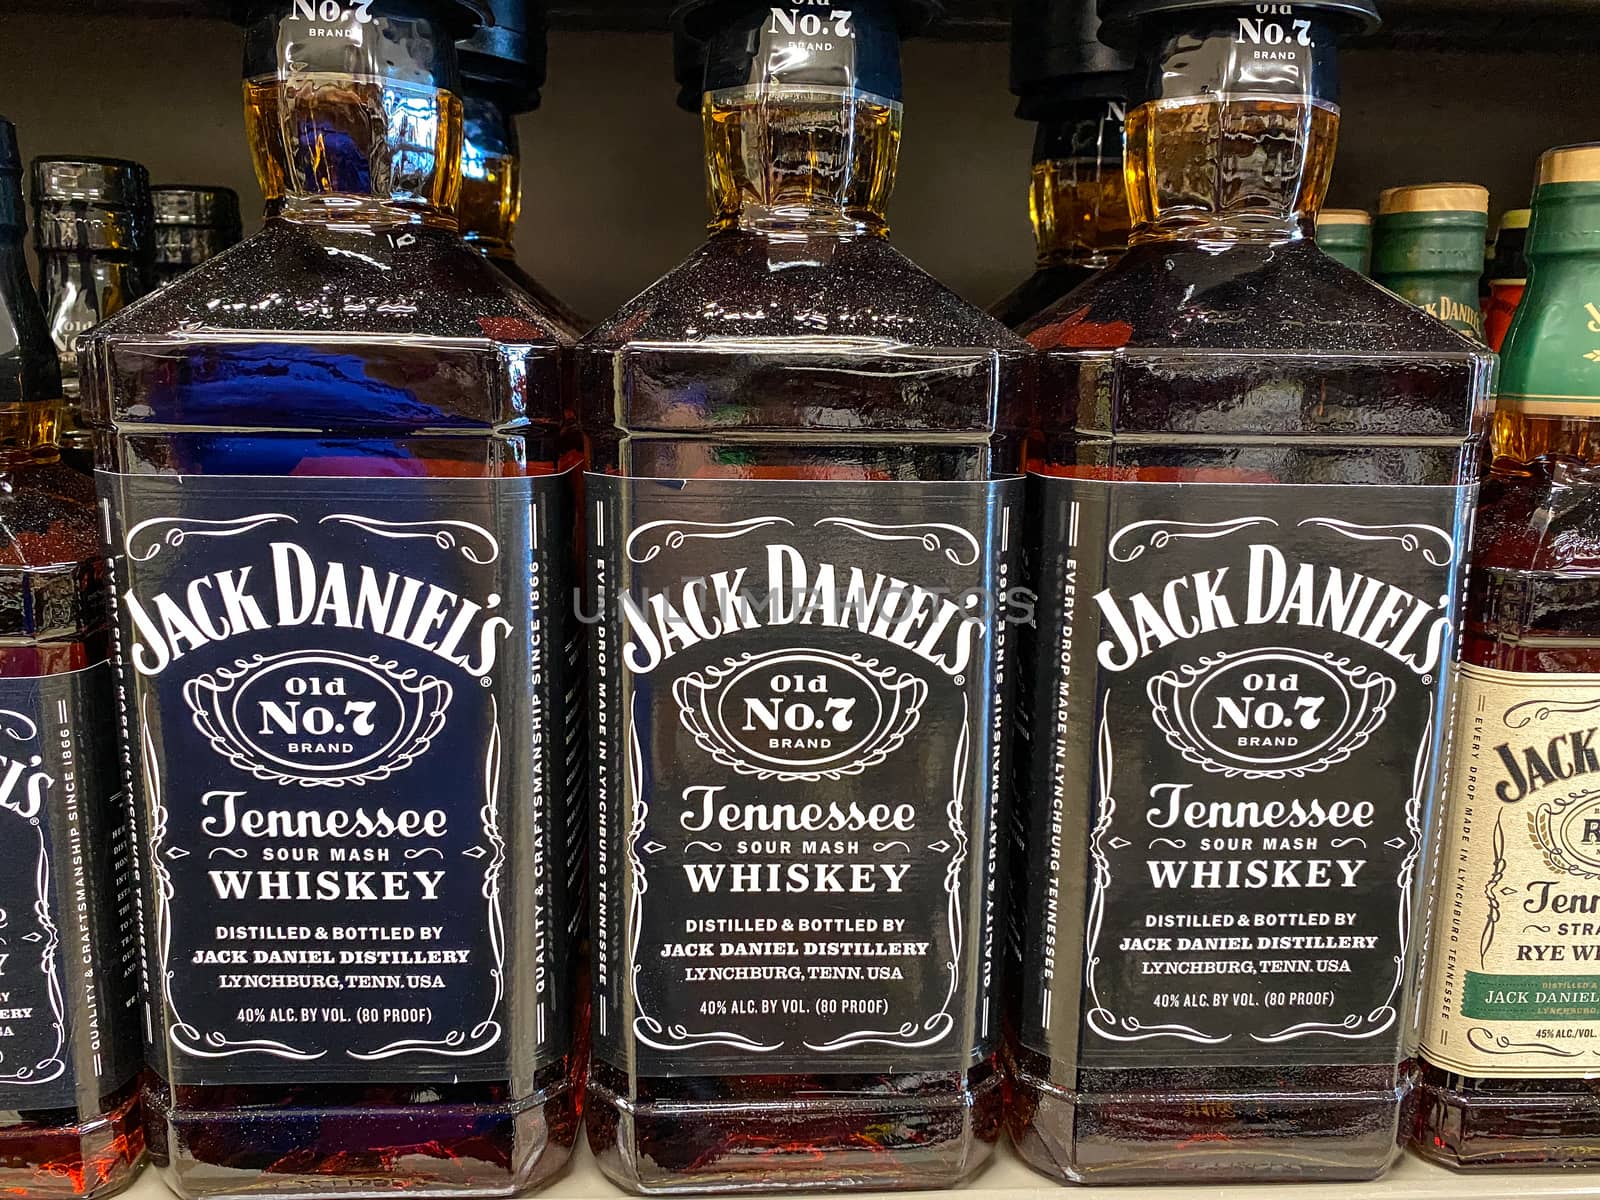 Orlando,FL/USA -5/13/20: A display of Jack Daniel's Tennessee Sour Mash Whiskey at a Publix liqour store.